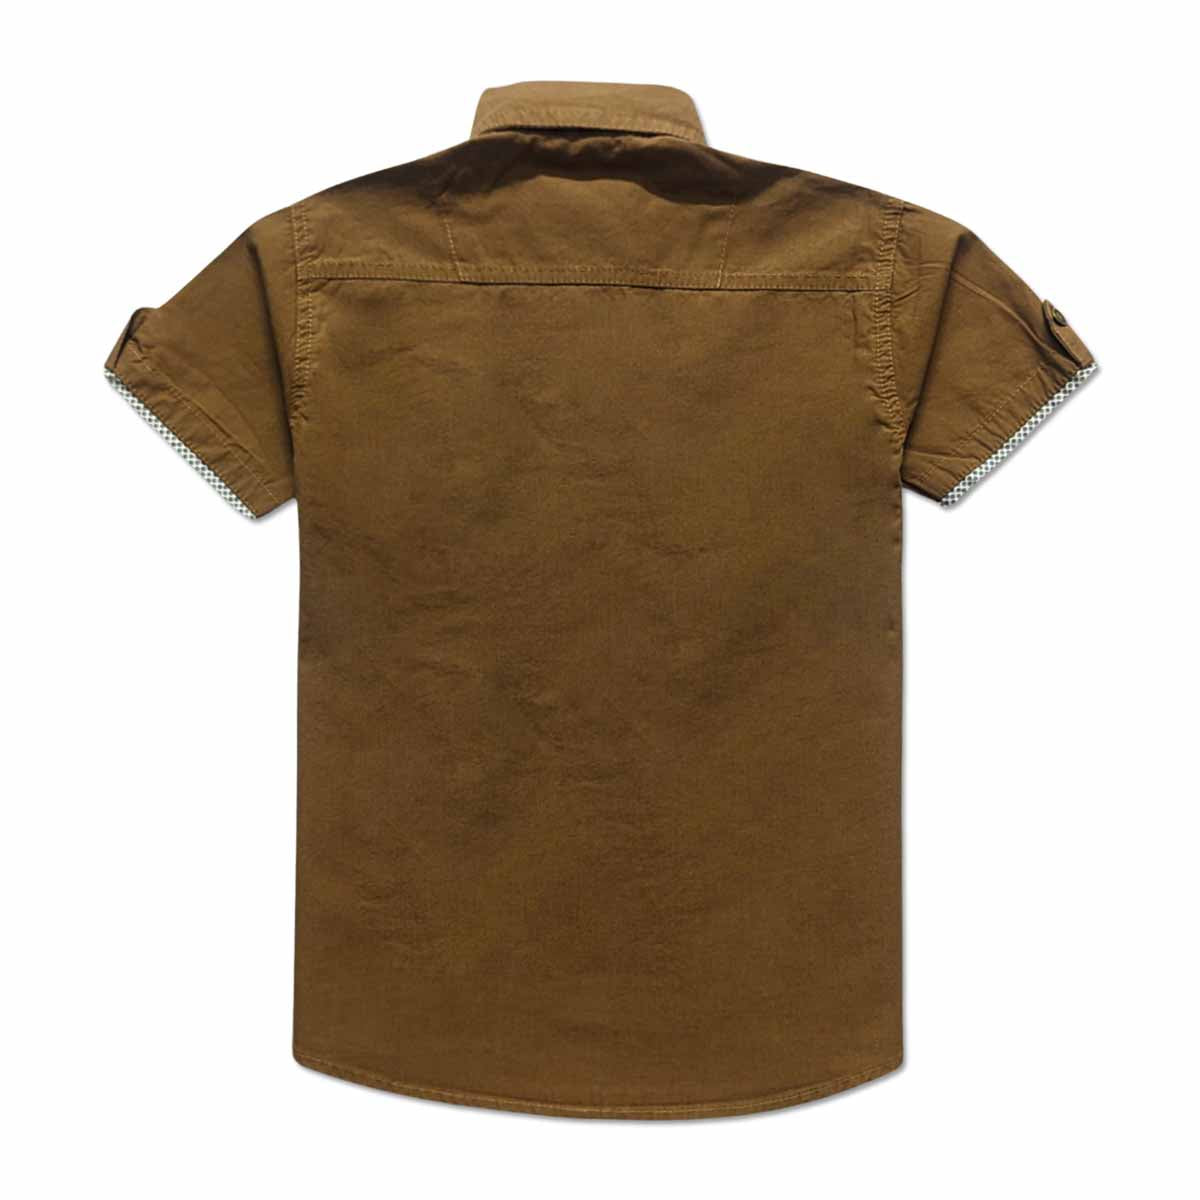 Brand Expo Premium Quality Branded Half Sleeves Shirt for Boy's